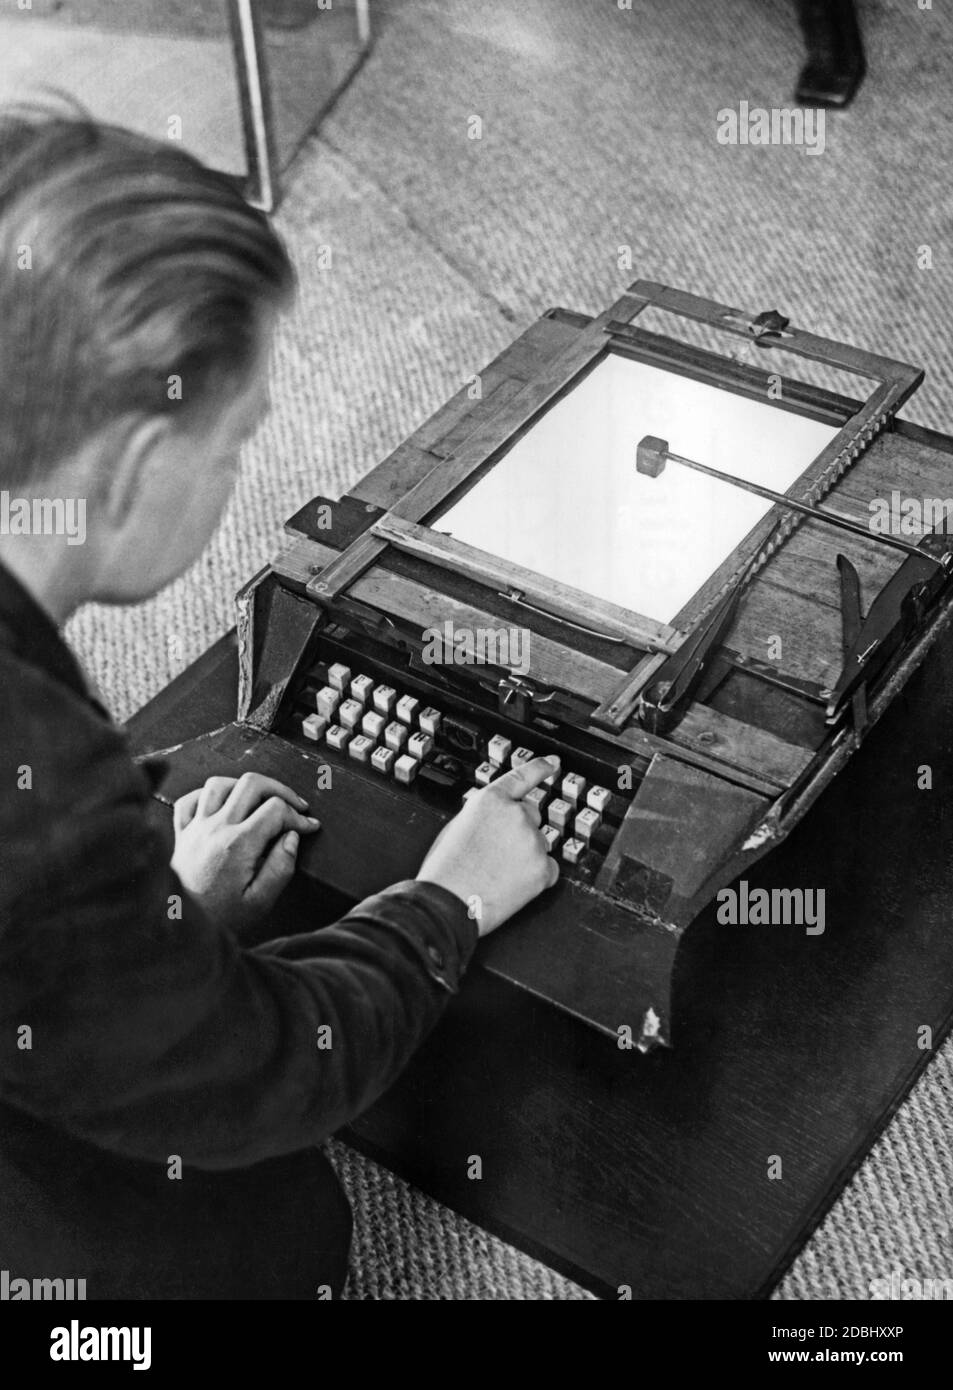 A boy writes on the first German typewriter. This was built in 1867 by the Tyrolean carpenter Mitterhofer and was improved continuously. The picture was taken at a trade fair or exhibition, probably in the 1930s. Stock Photo